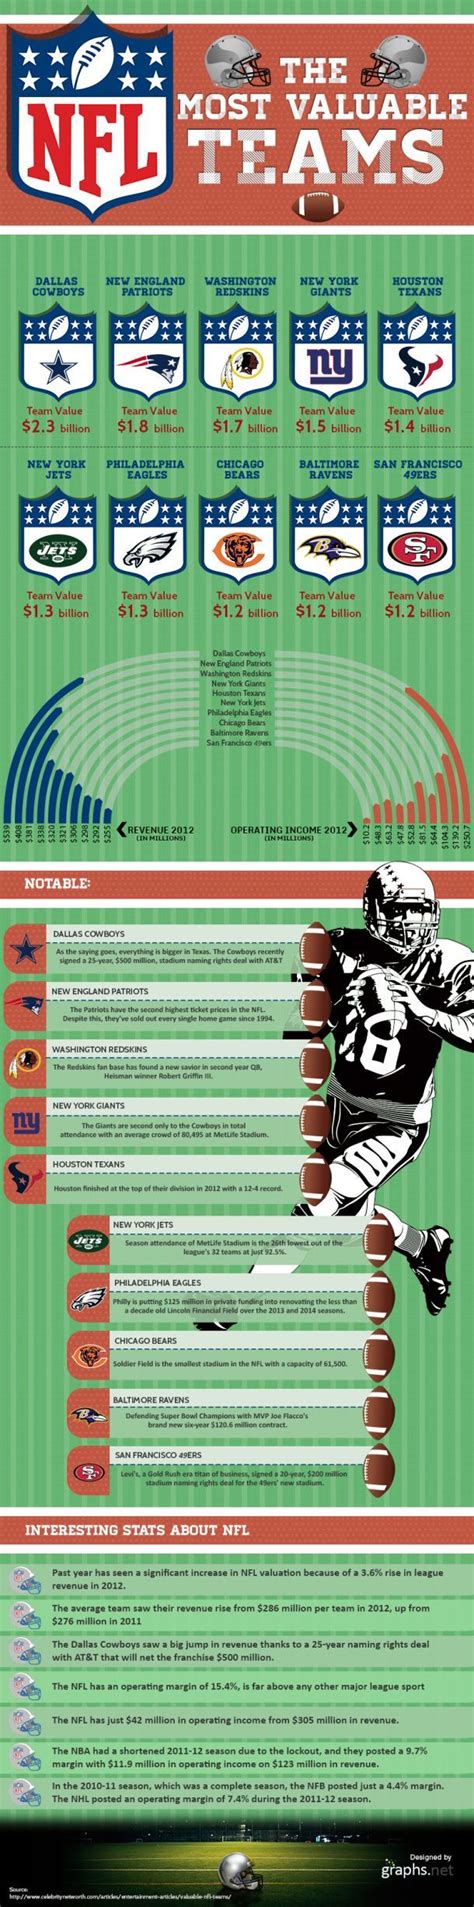 NFL The Most Valuable Teams INFOGRAPHIC NFL Valuable Nfl Titans Football Nfl Teams